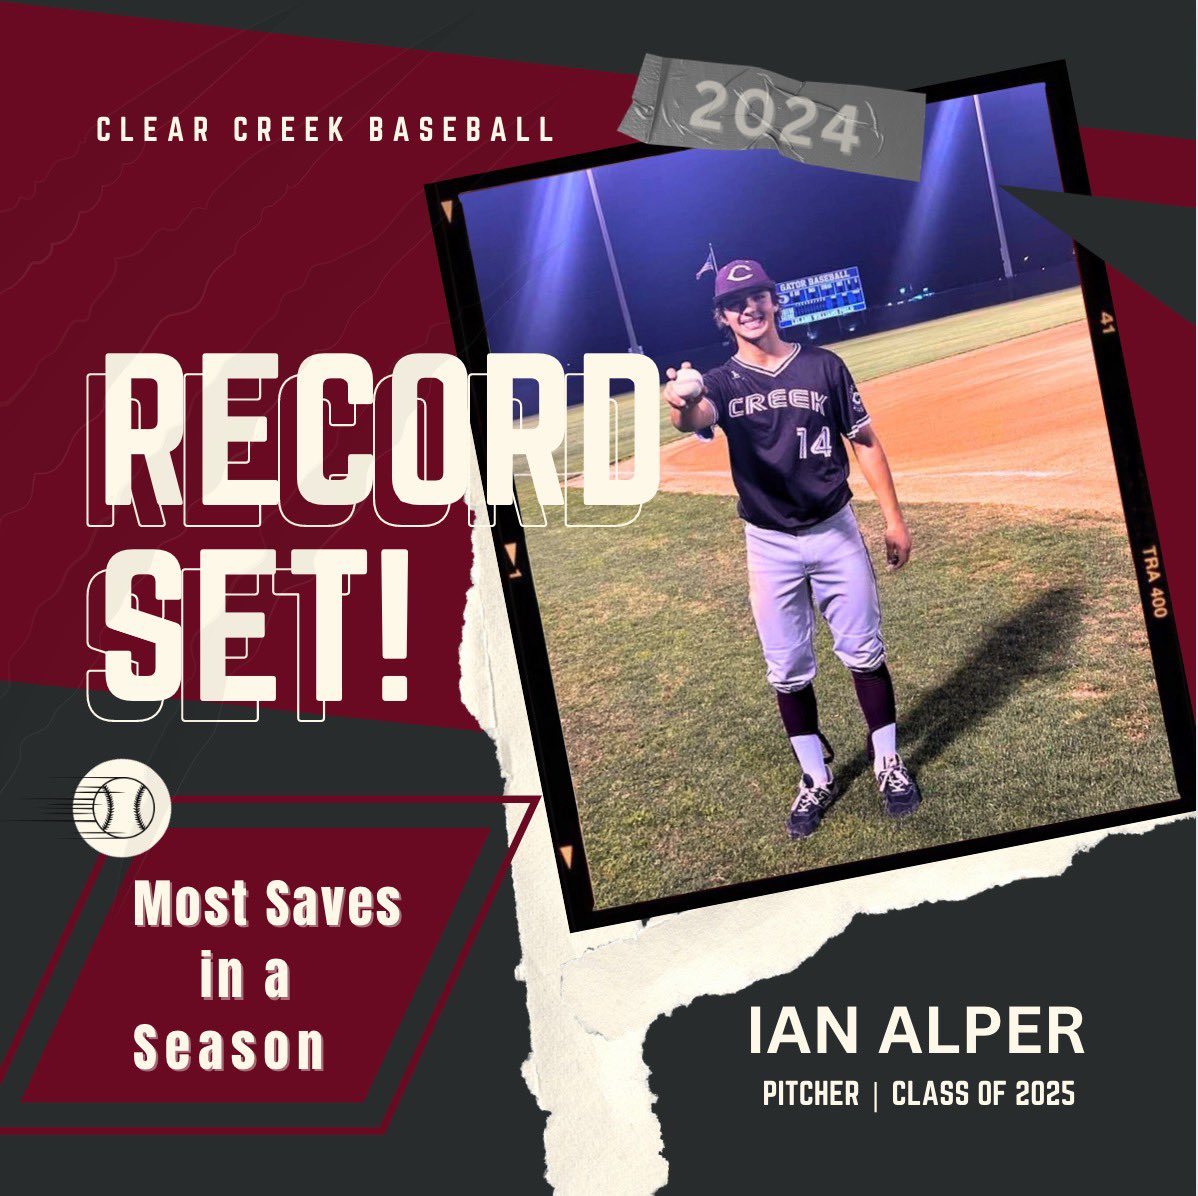 Stats don’t lie. Records are meant to be set, then broken! Congrats to Junior pitcher, Ian Alper, for setting a new school record for most saves in a season! Last record was set in 1988 (8)! Not done yet…keep raising that bar!! #traditionsnevergraduate #settingnewrecords